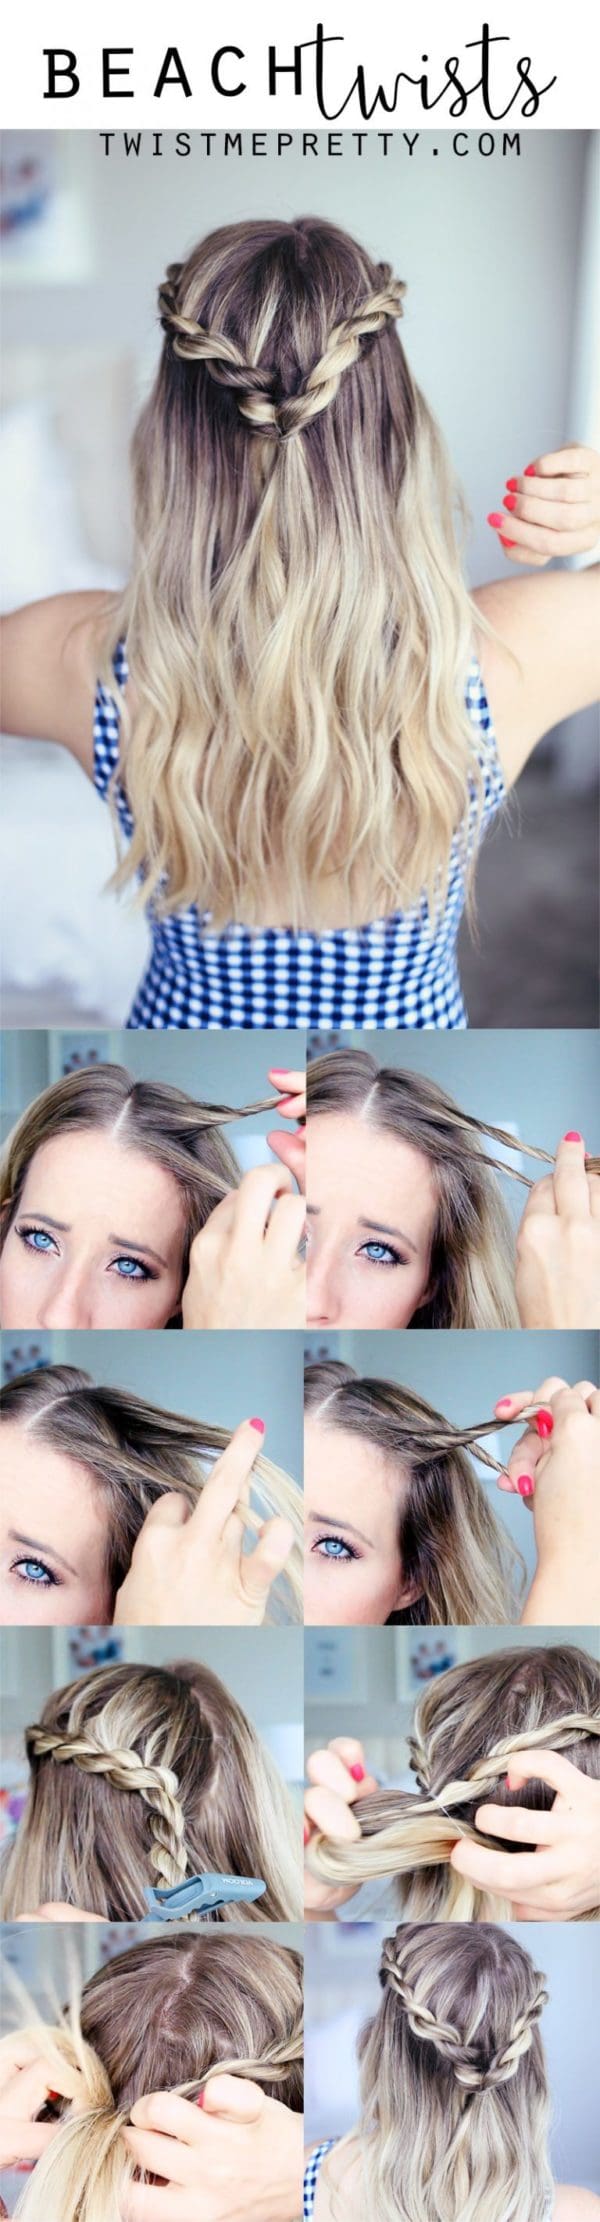 Easy Step By Step Hairstyle Tutorials You Can Do For Less Than 5 Minutes